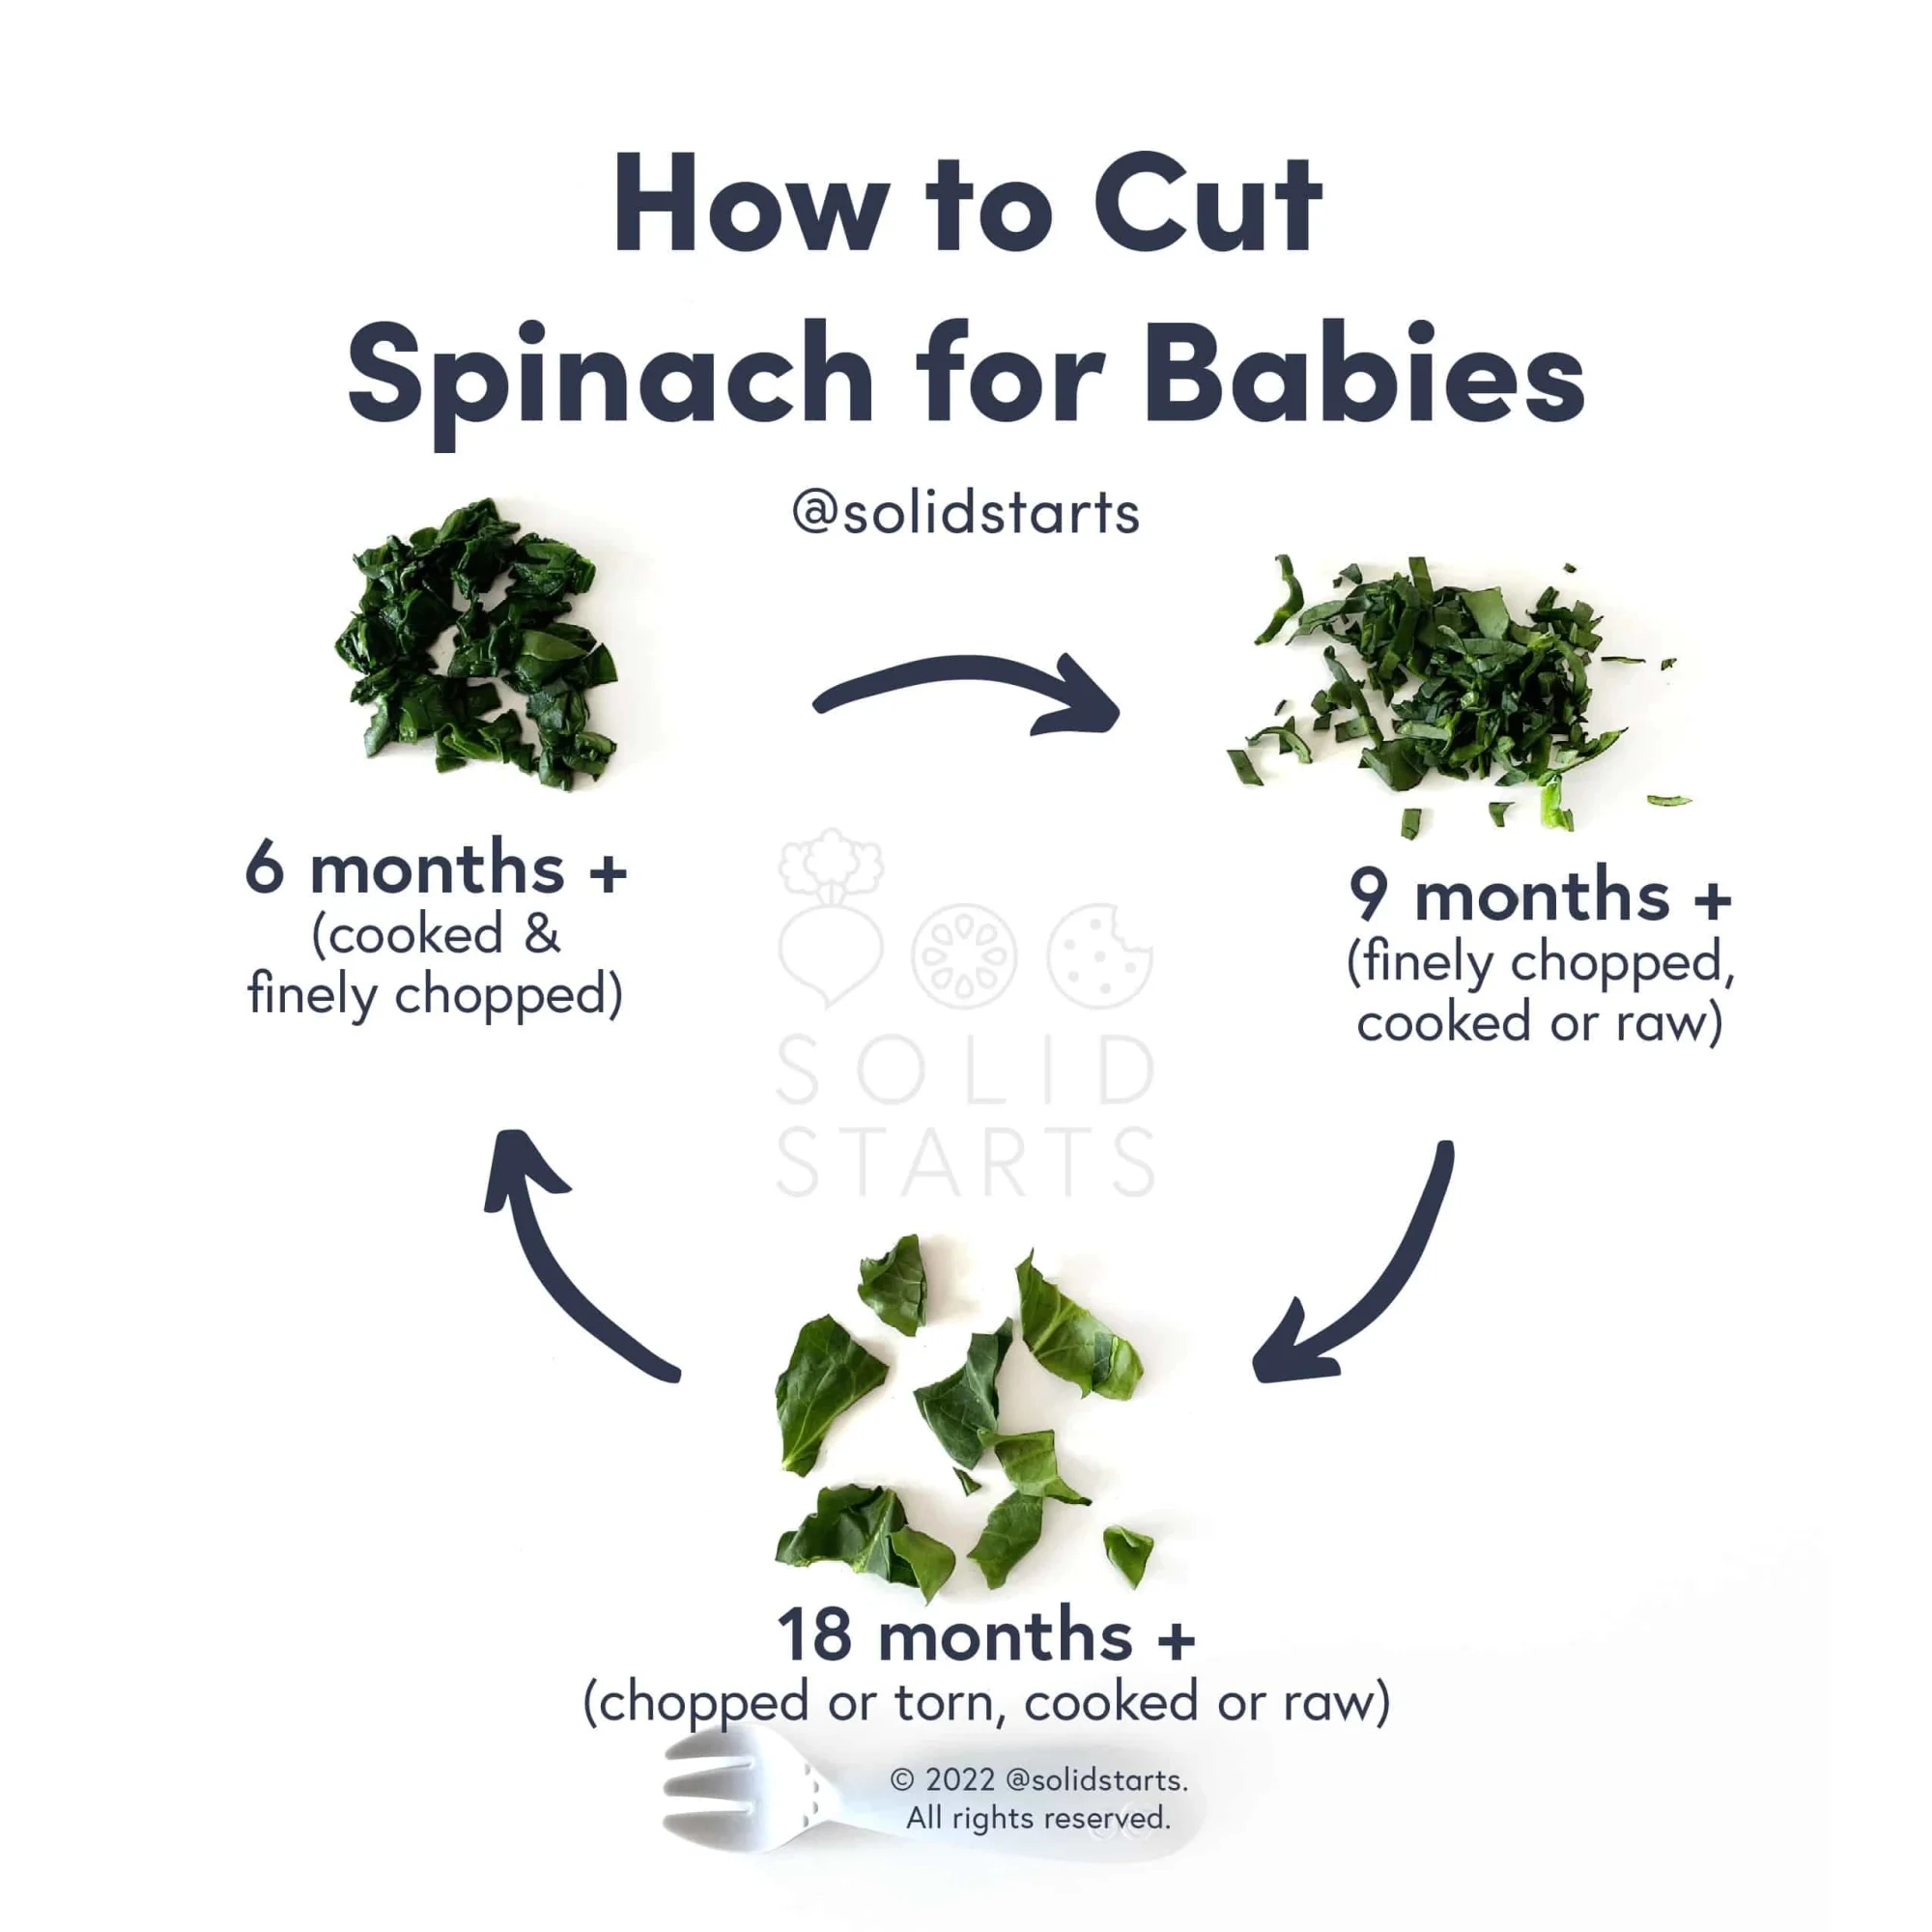 an infographic with the header "how to cut spinach for babies": cooked and finely chopped for 6 months+, finely chopped, cooked or raw for 9 months+, and chopped or torn, cooked or raw for 18 months+